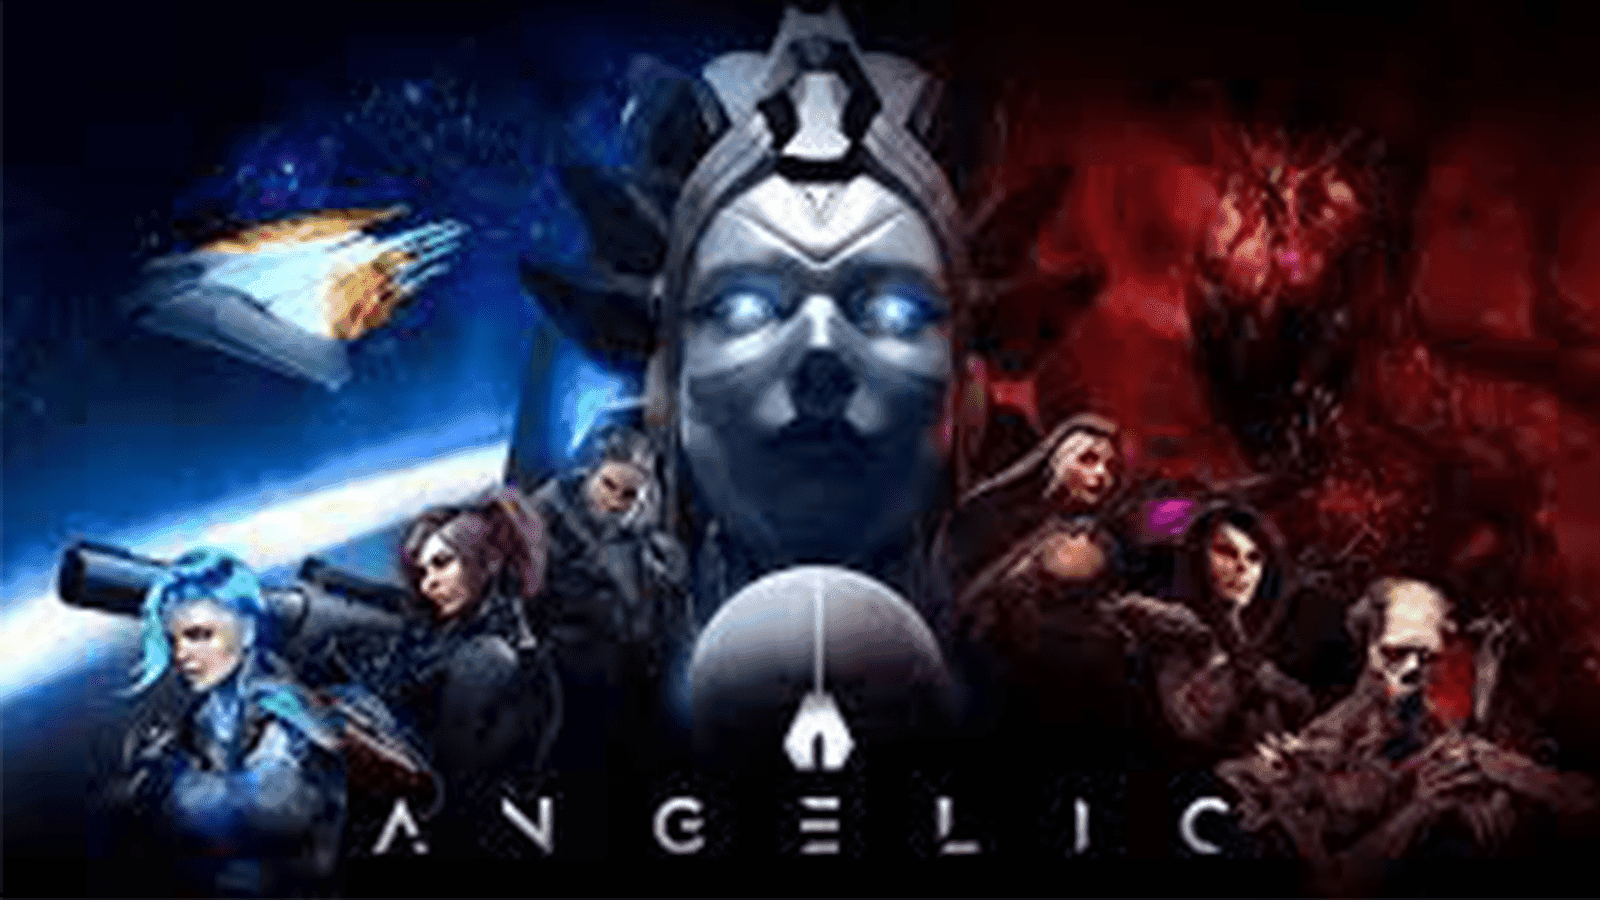 Angelic Awaits: Dive into Sci-Fi Tactical NFT Gaming - Review